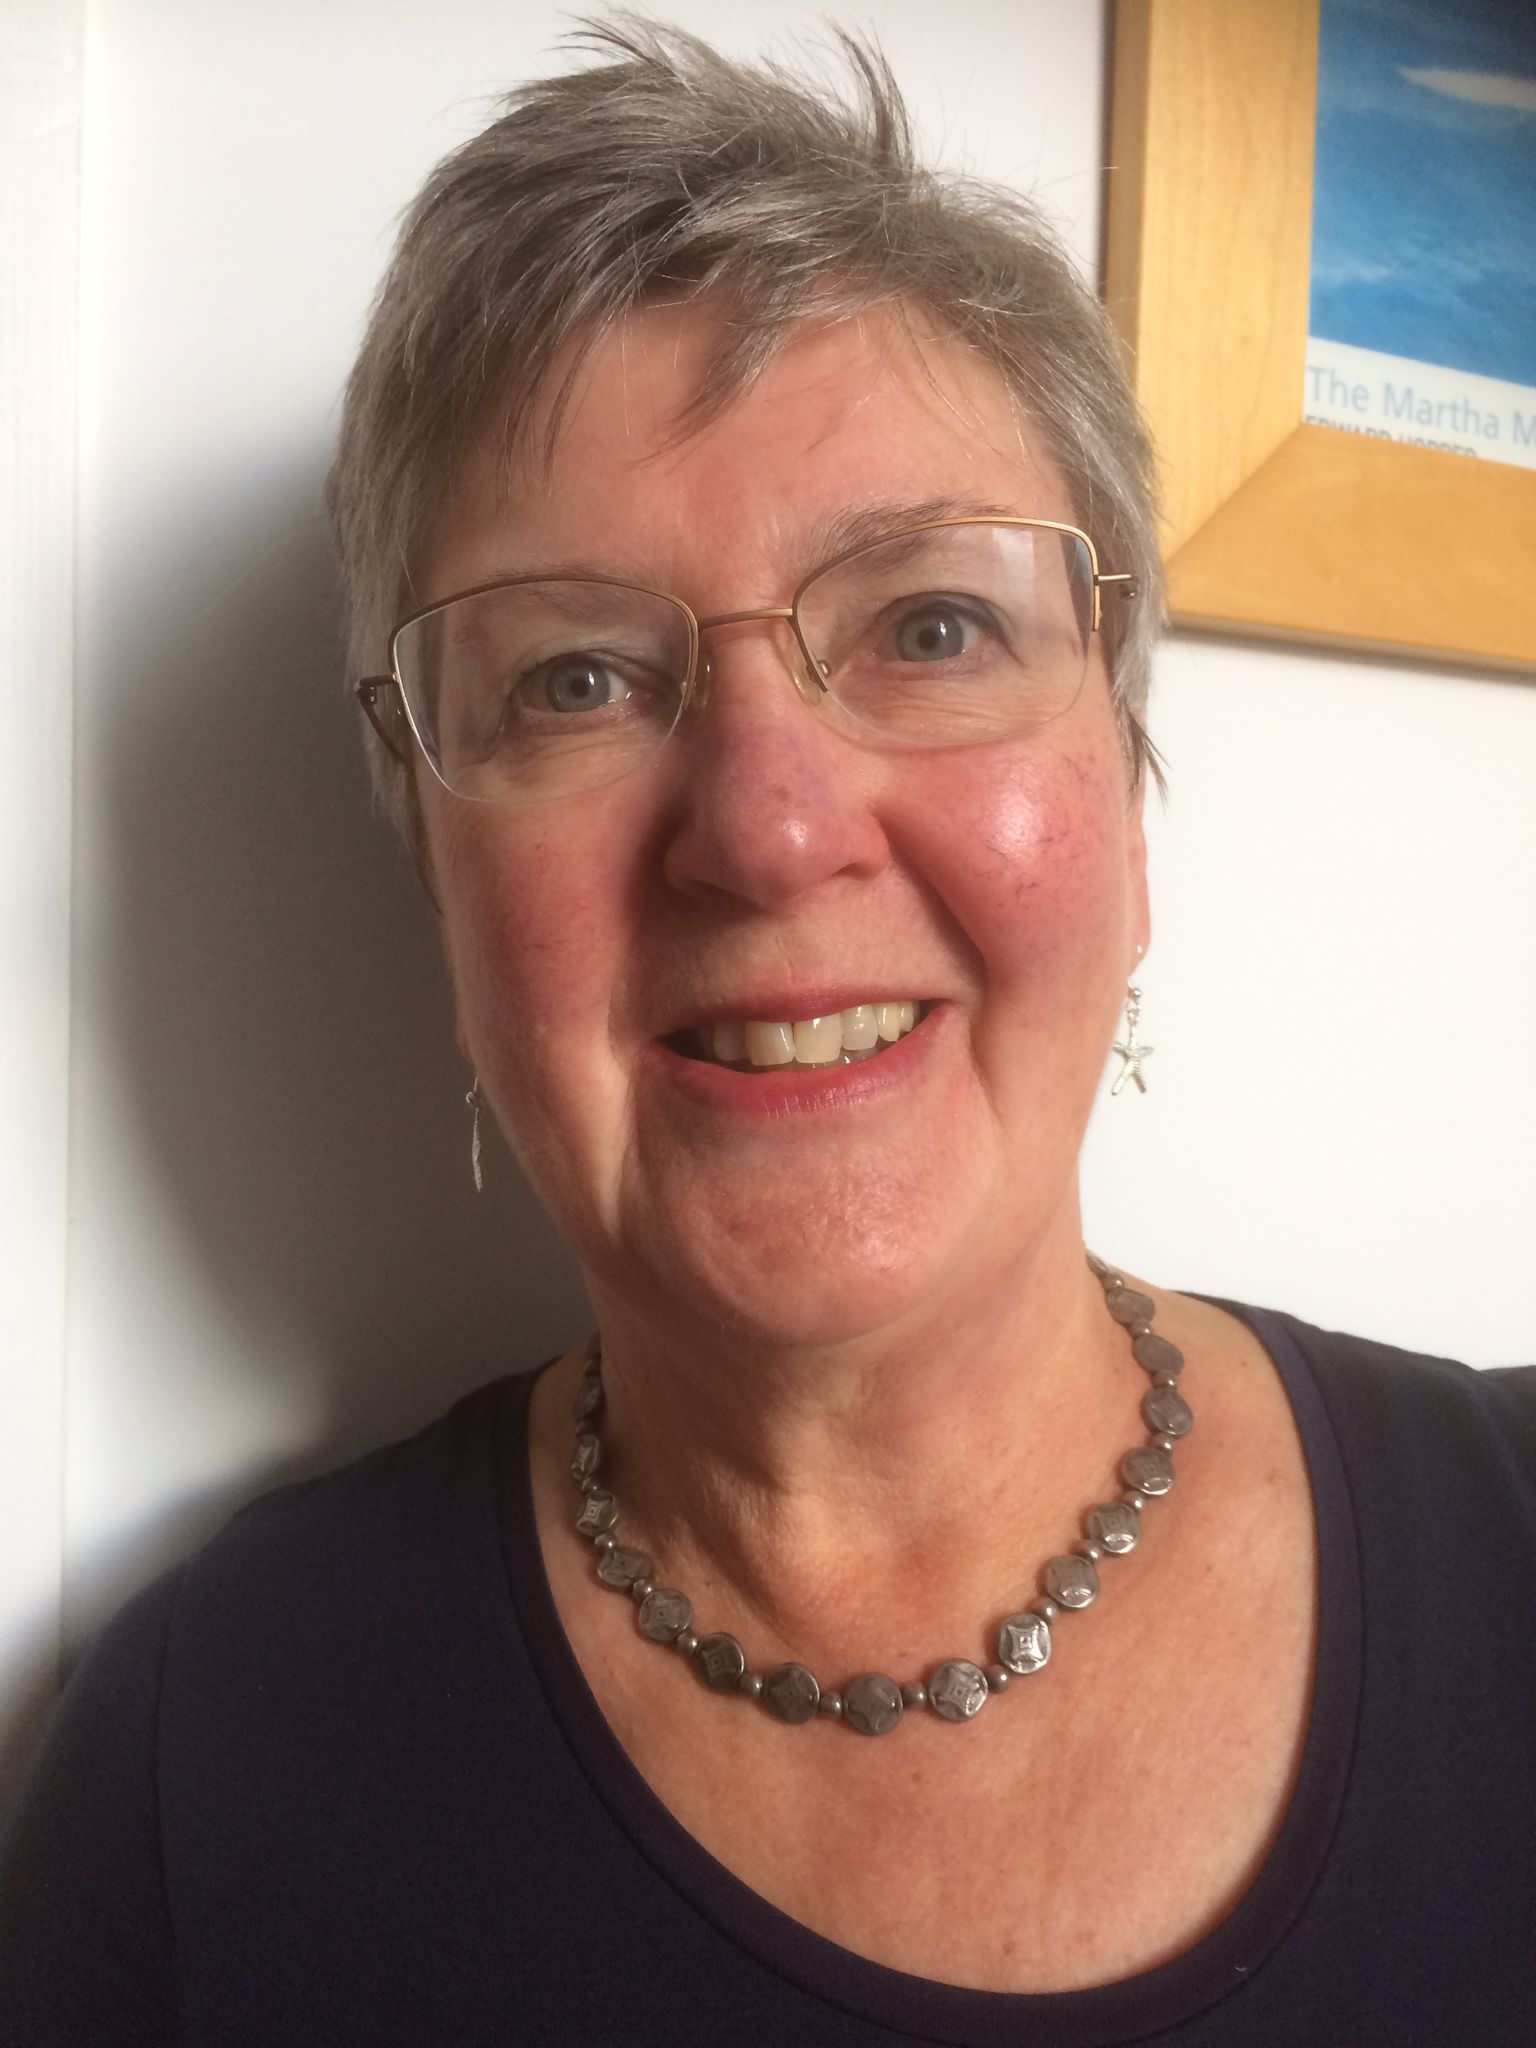 Picture shows a portrait photograph of Jill Carr, author of Astrolations! Jill is a white woman, in her 70s. She has short, ash blonde hair and is smiling looking at the camera. Jill is wearing glasses, dangly earrings and a chunky silver necklace. 